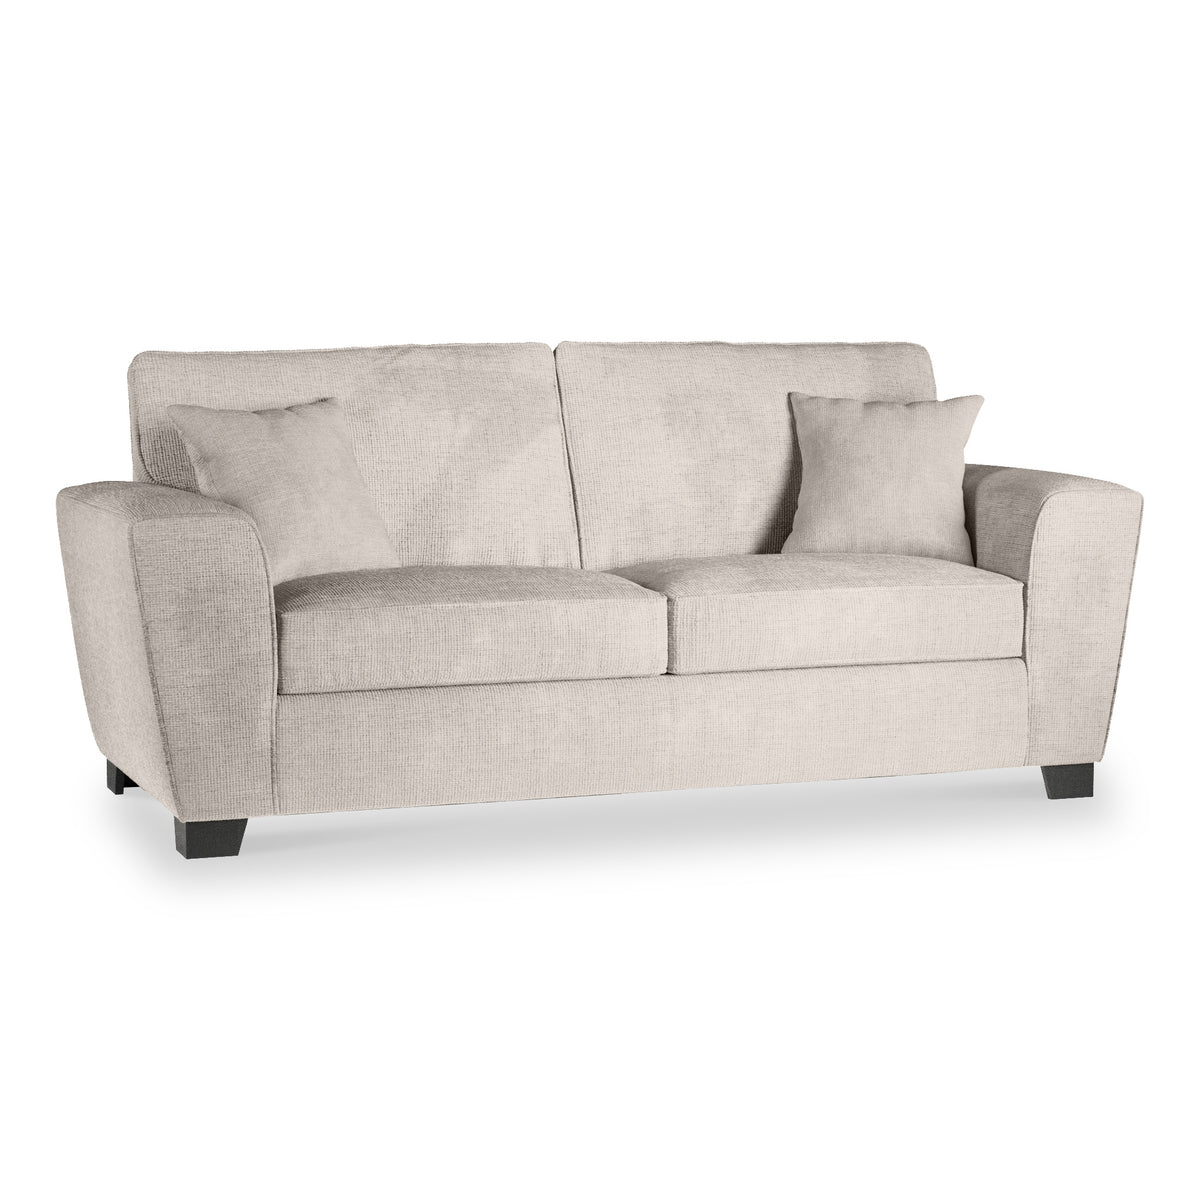 Chester Stone Hopsack 3 Seater Sofa from Roseland Furniture